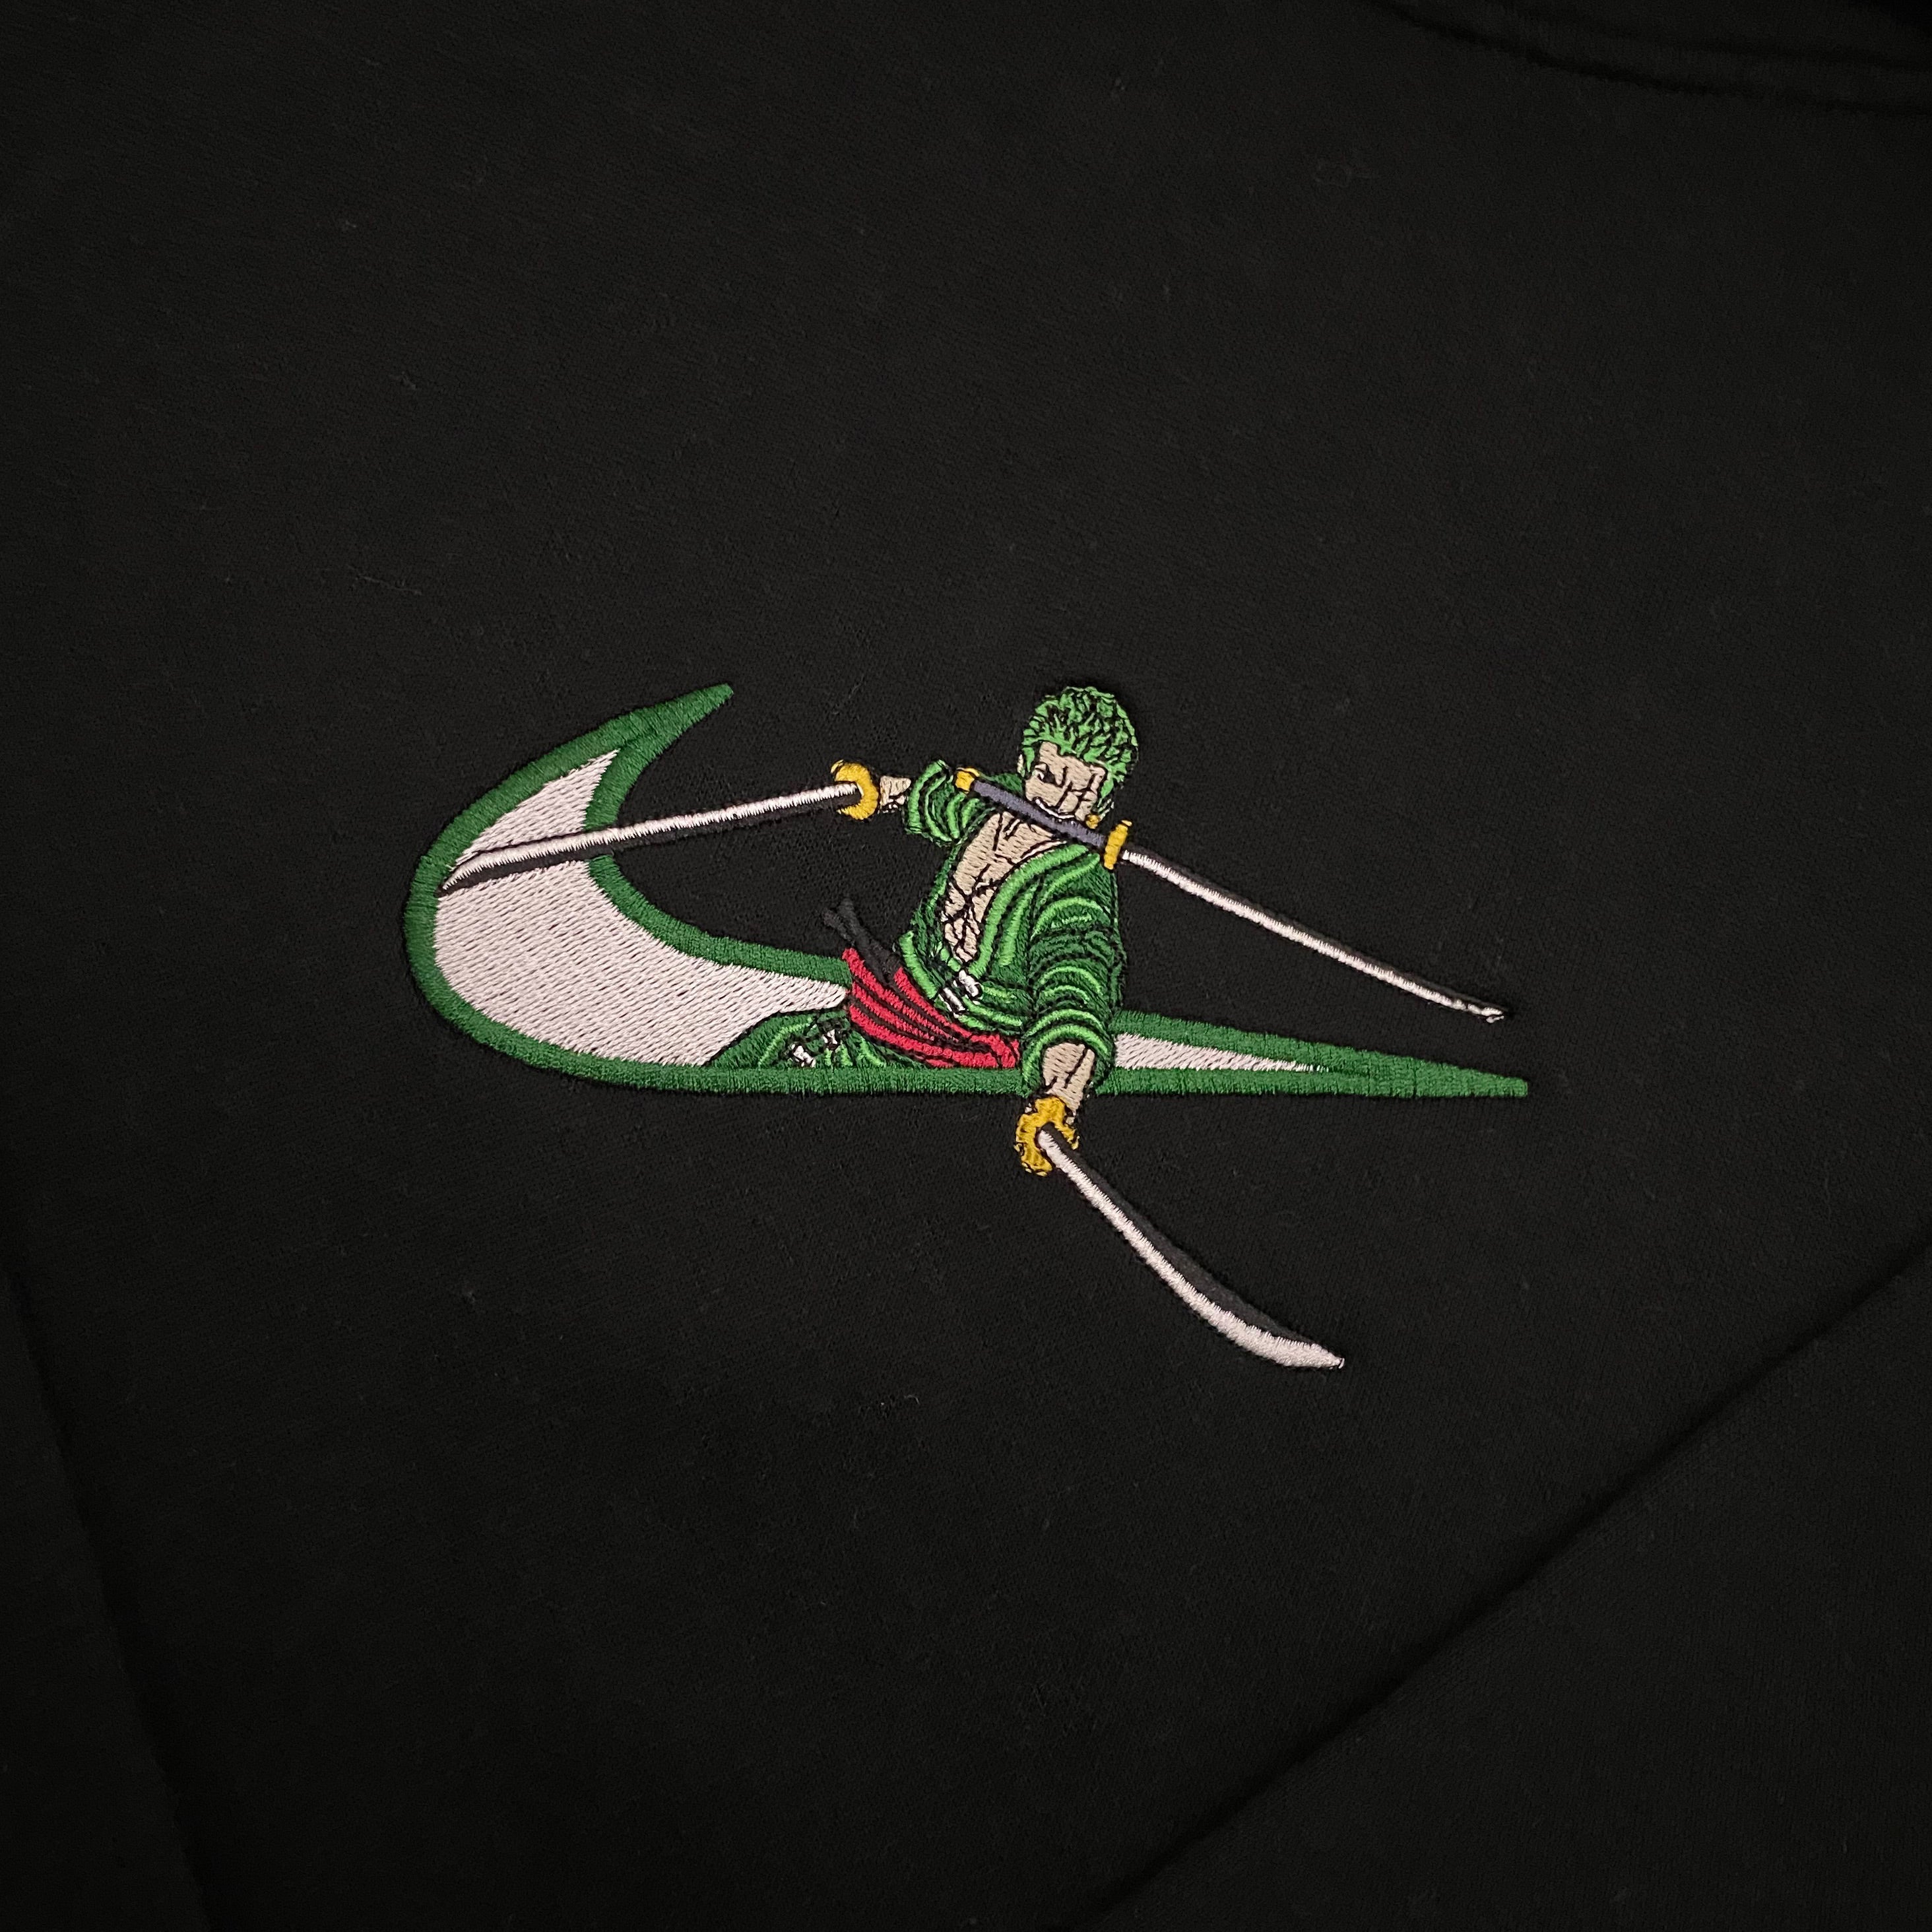 LIMITED ZORO "DADDY" RORONOA EMBROIDERED HOODIE